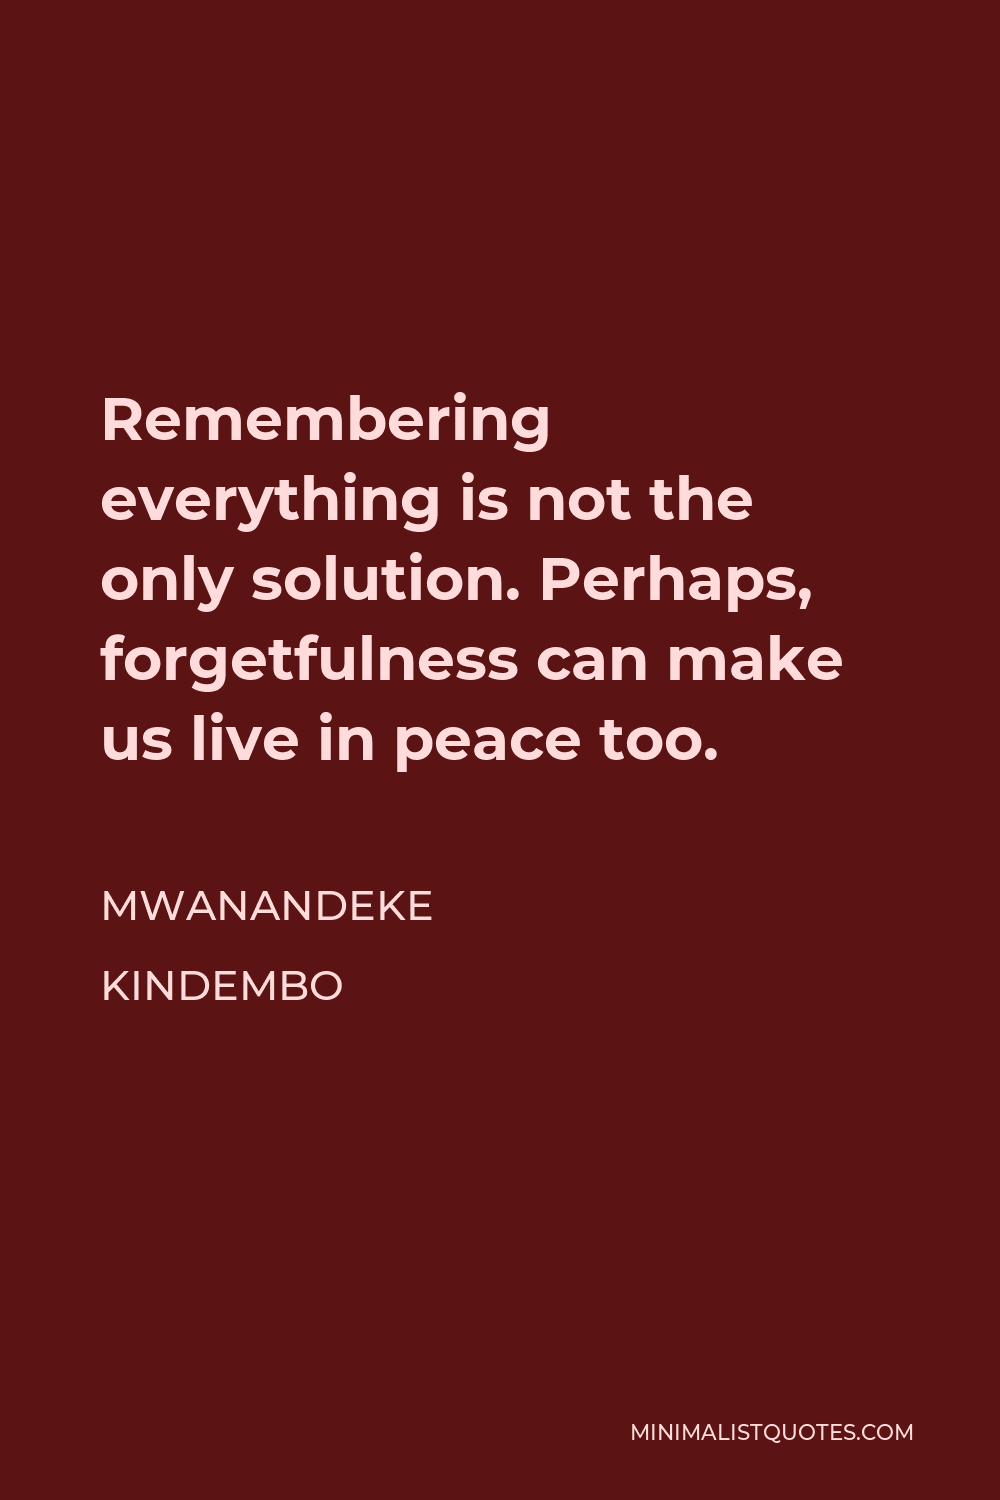 Mwanandeke Kindembo Quote - Remembering everything is not the only solution. Perhaps, forgetfulness can make us live in peace too.